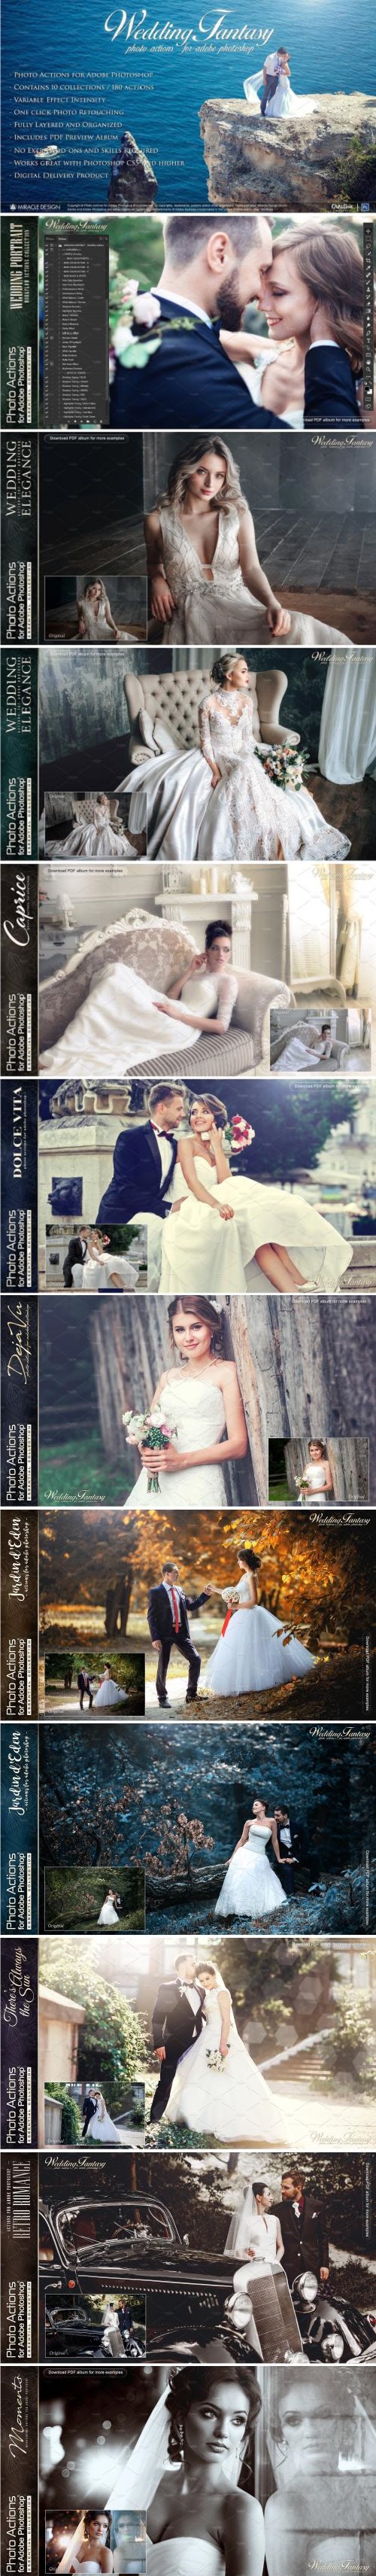 Actions for Photoshop / Wedding 2174196